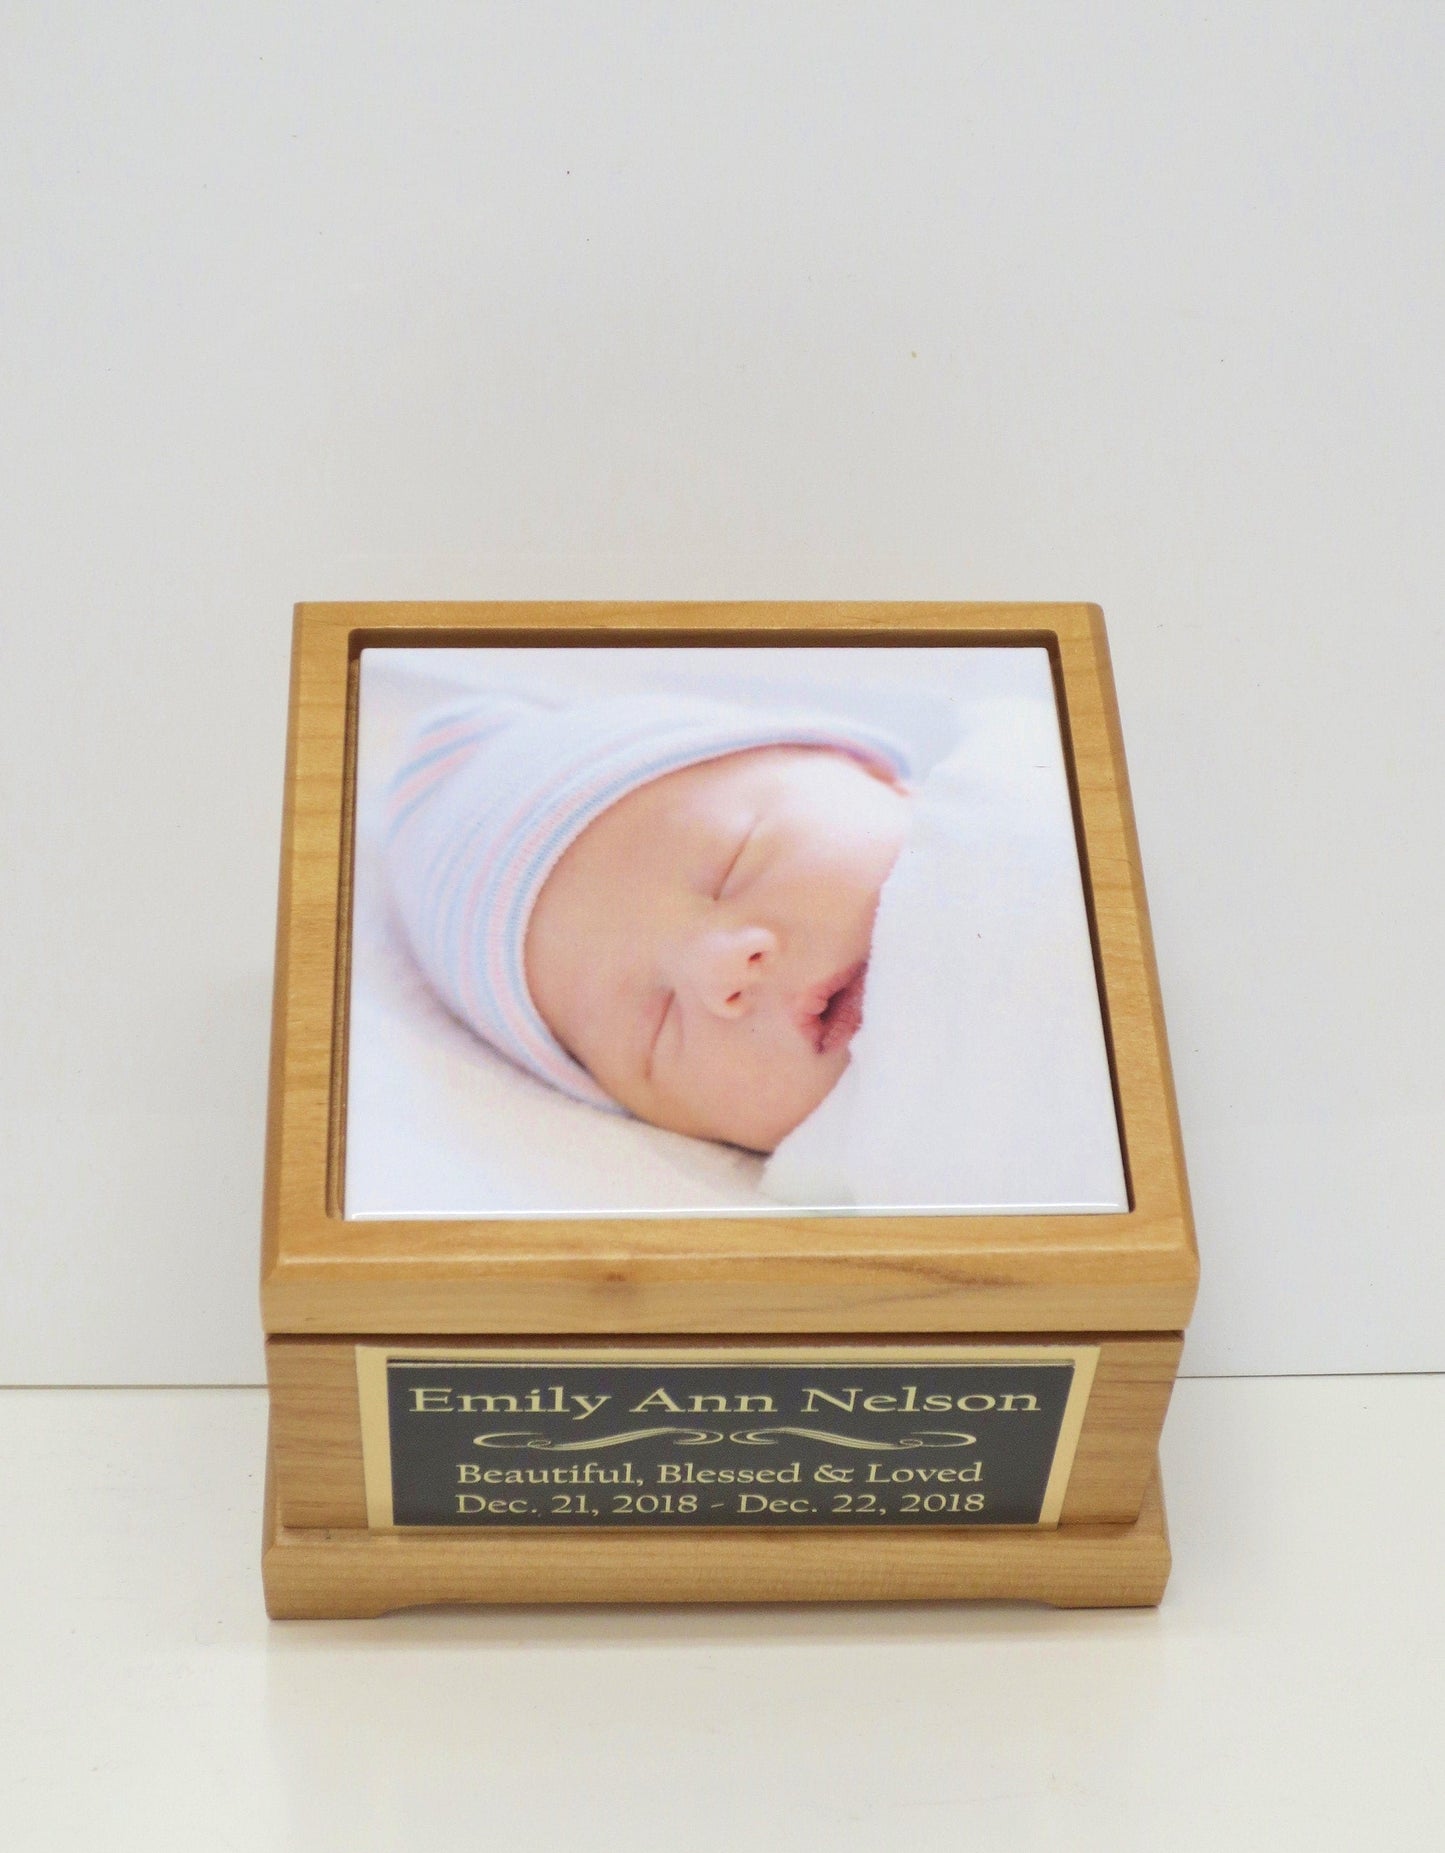 Infant Urn For Ashes Baby Urn Small Child Cremation Memorial Human Tile Photo & Personalized Engraved Tag Memorial Keepsake Red Alder 25 lbs